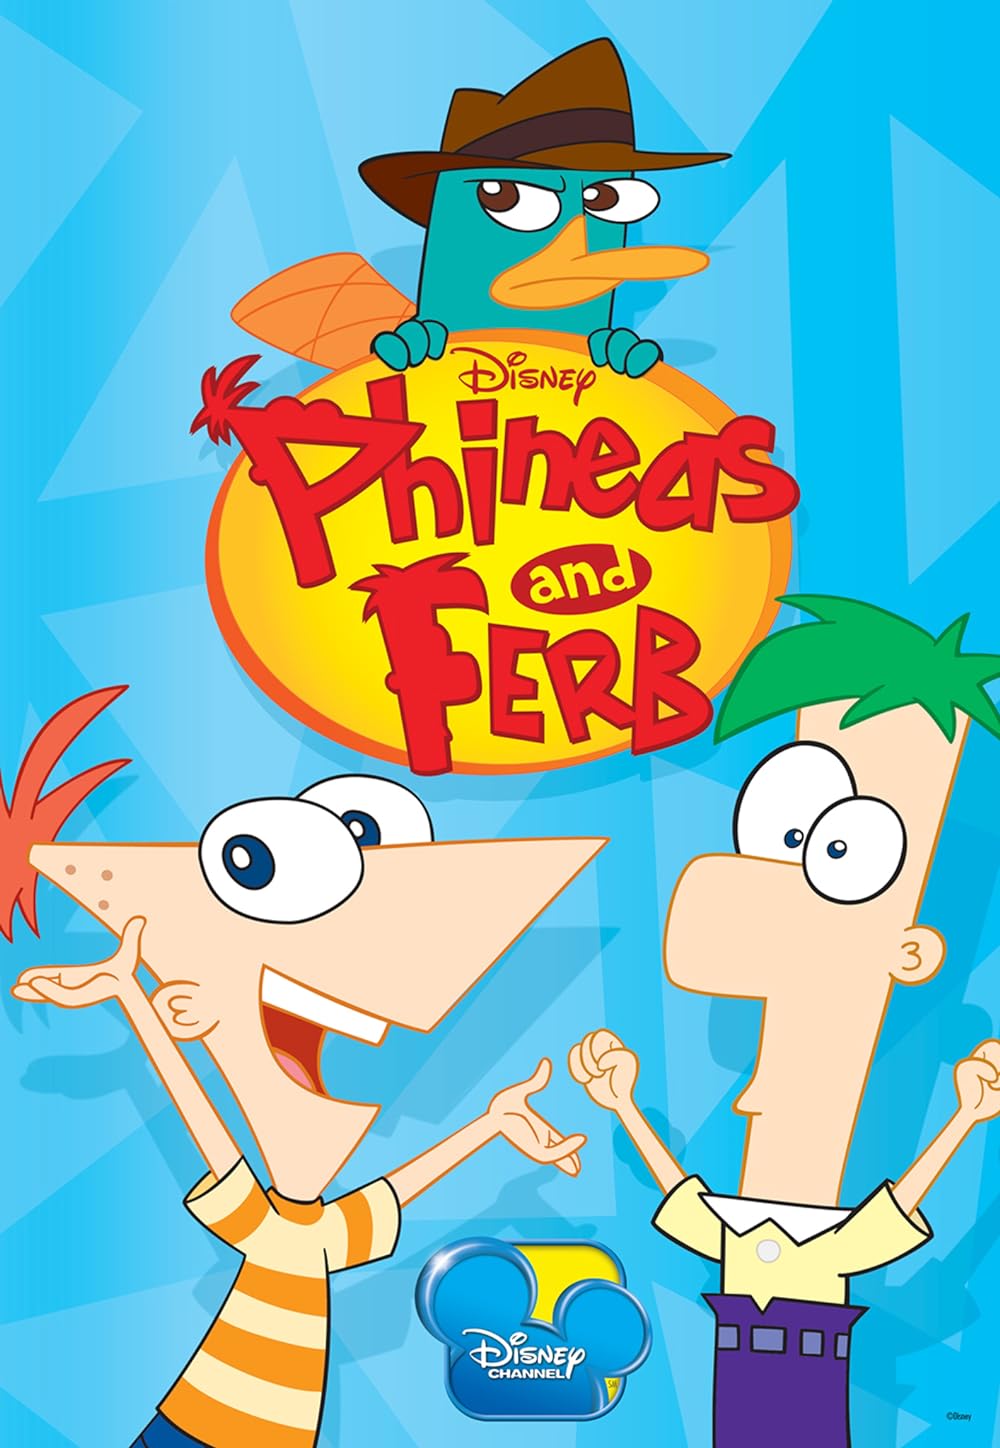 chad bradburn recommends pictures of ferb from phineas and ferb pic